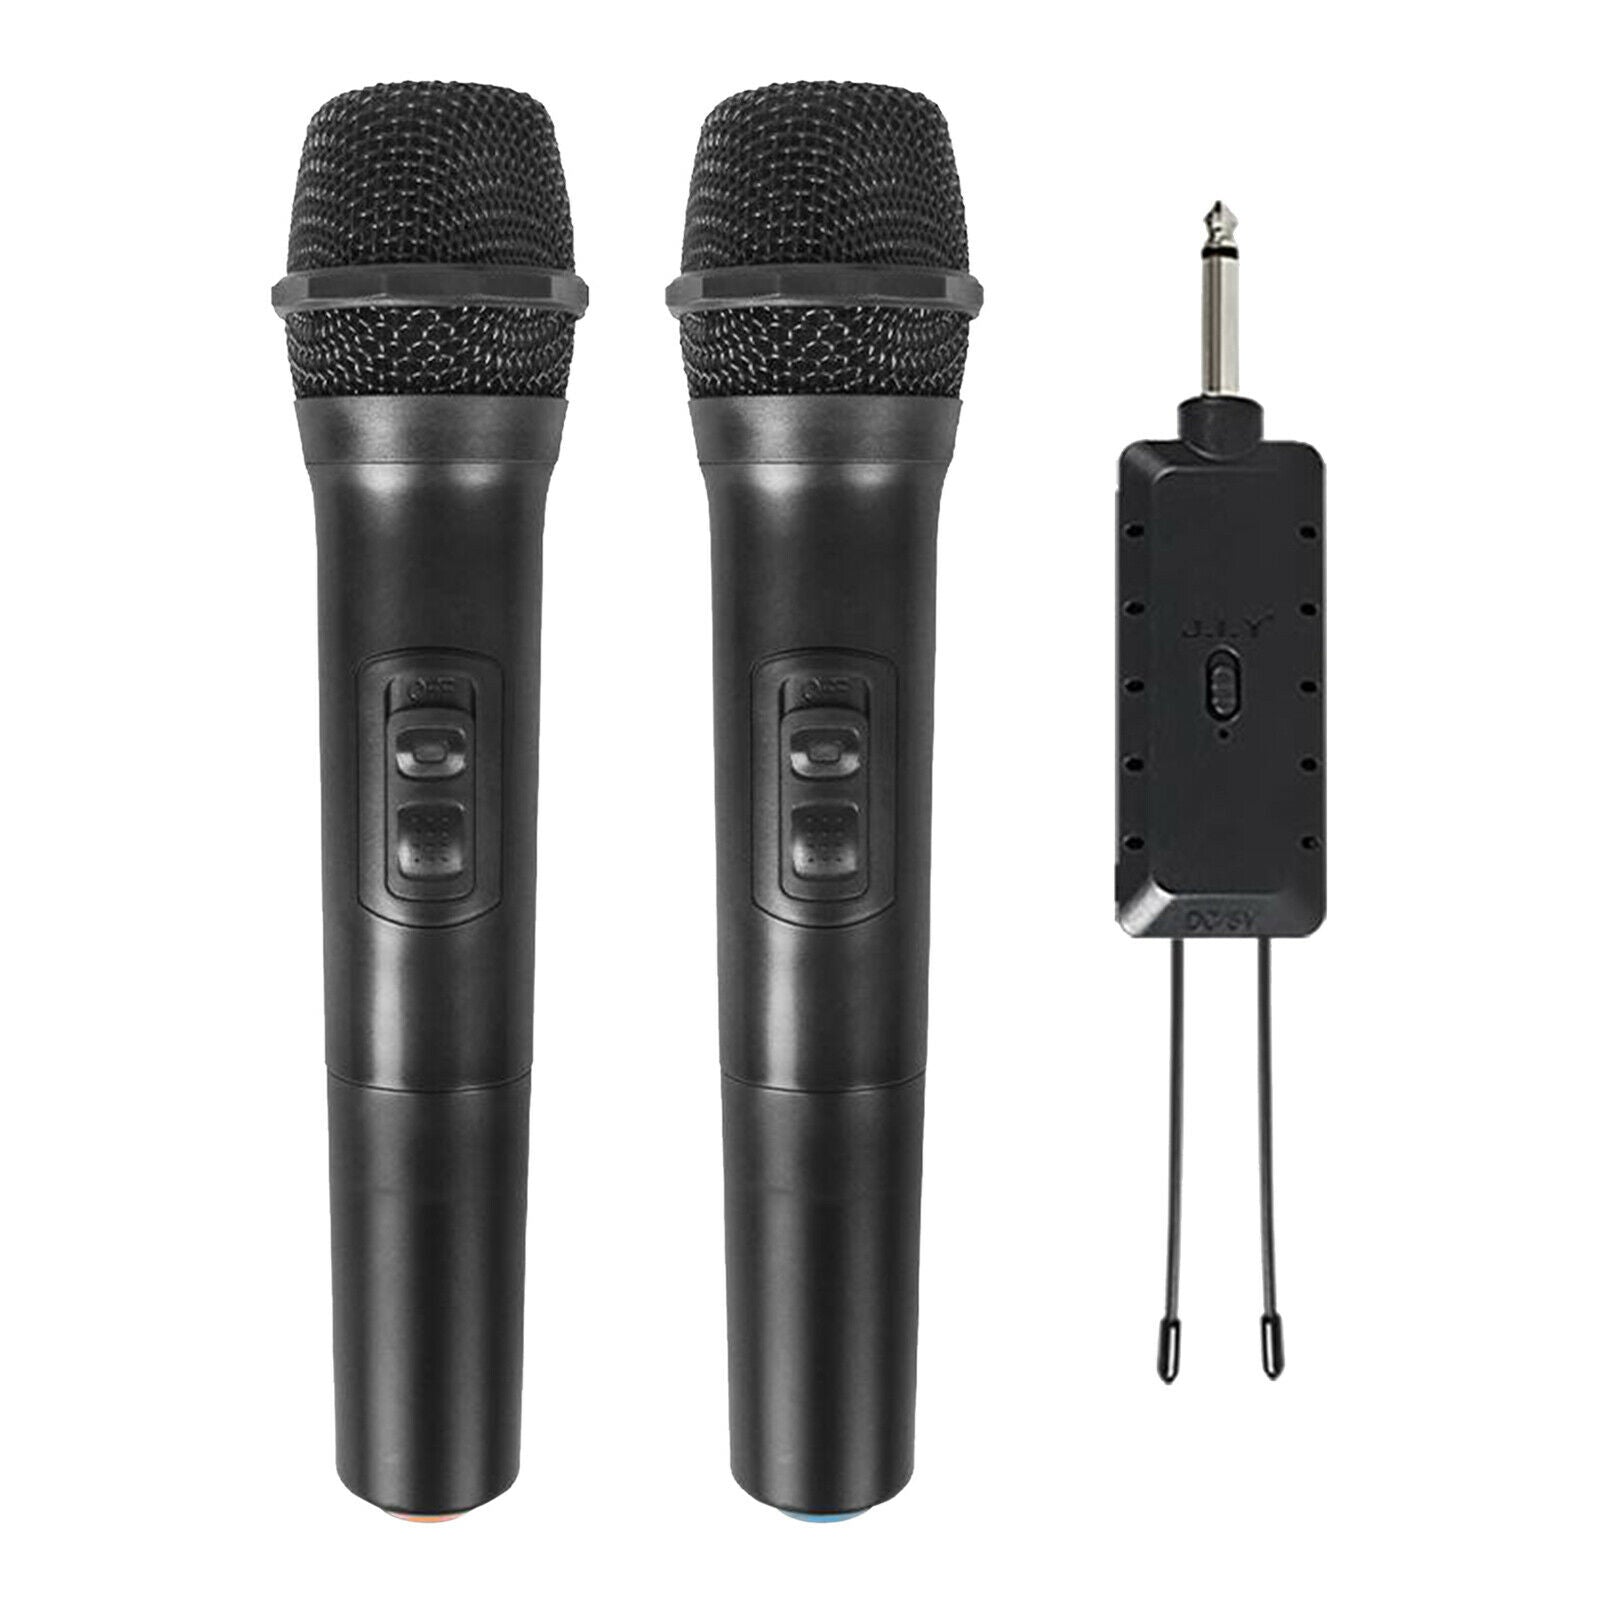 2x Cordless Handheld Microphone System for Home Karaoke, Meeting, Party, Speech,